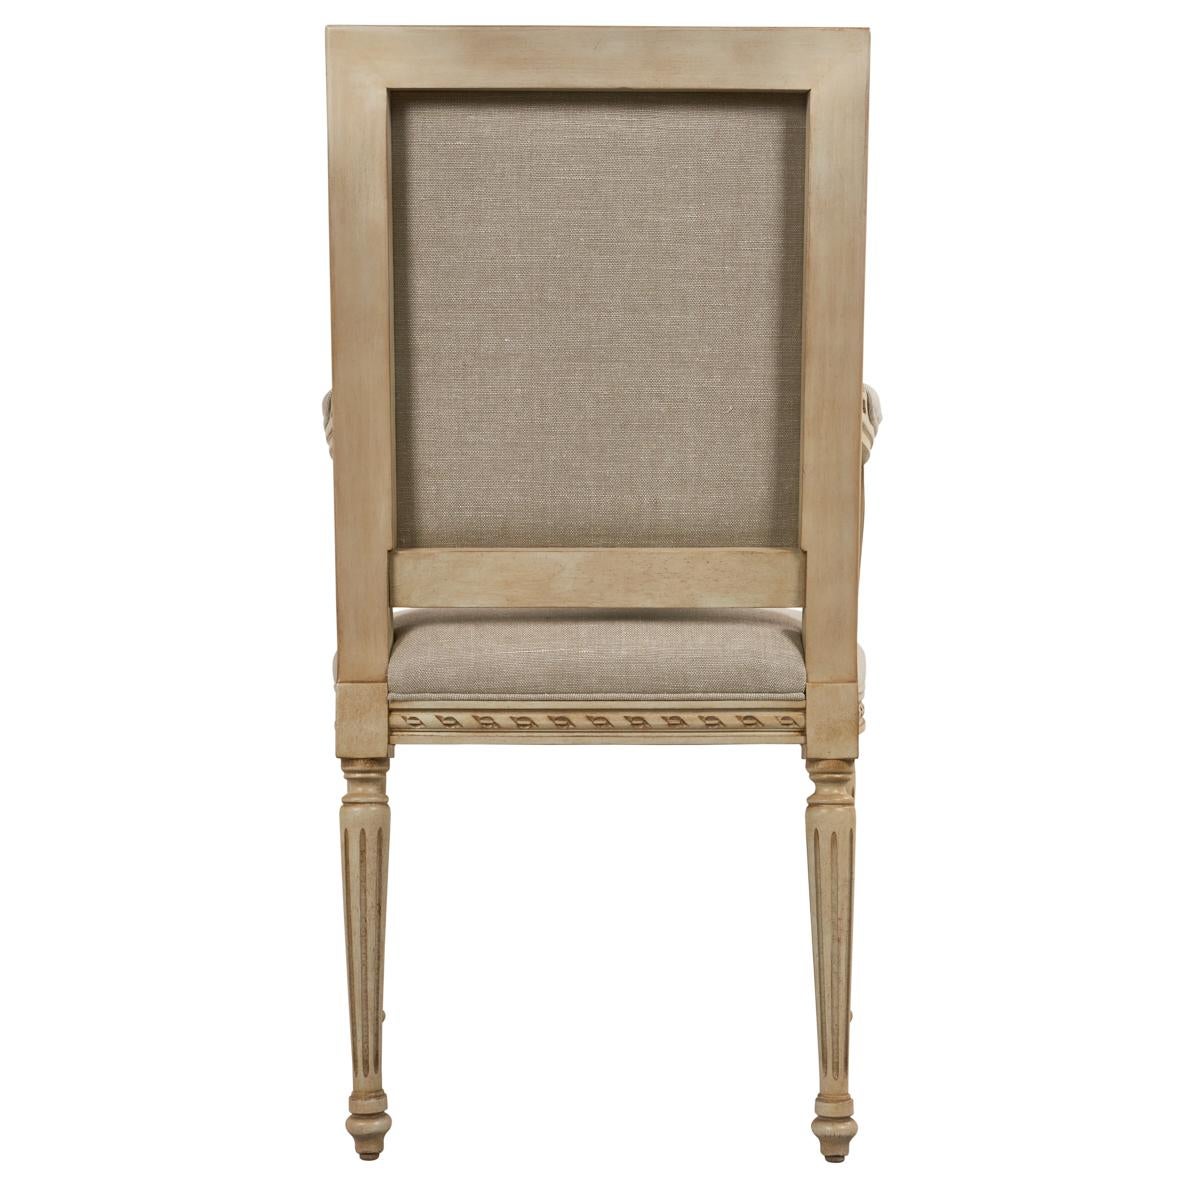 Louis XVI Arm Chair in Piet Performance Linen In New Condition For Sale In New York, NY